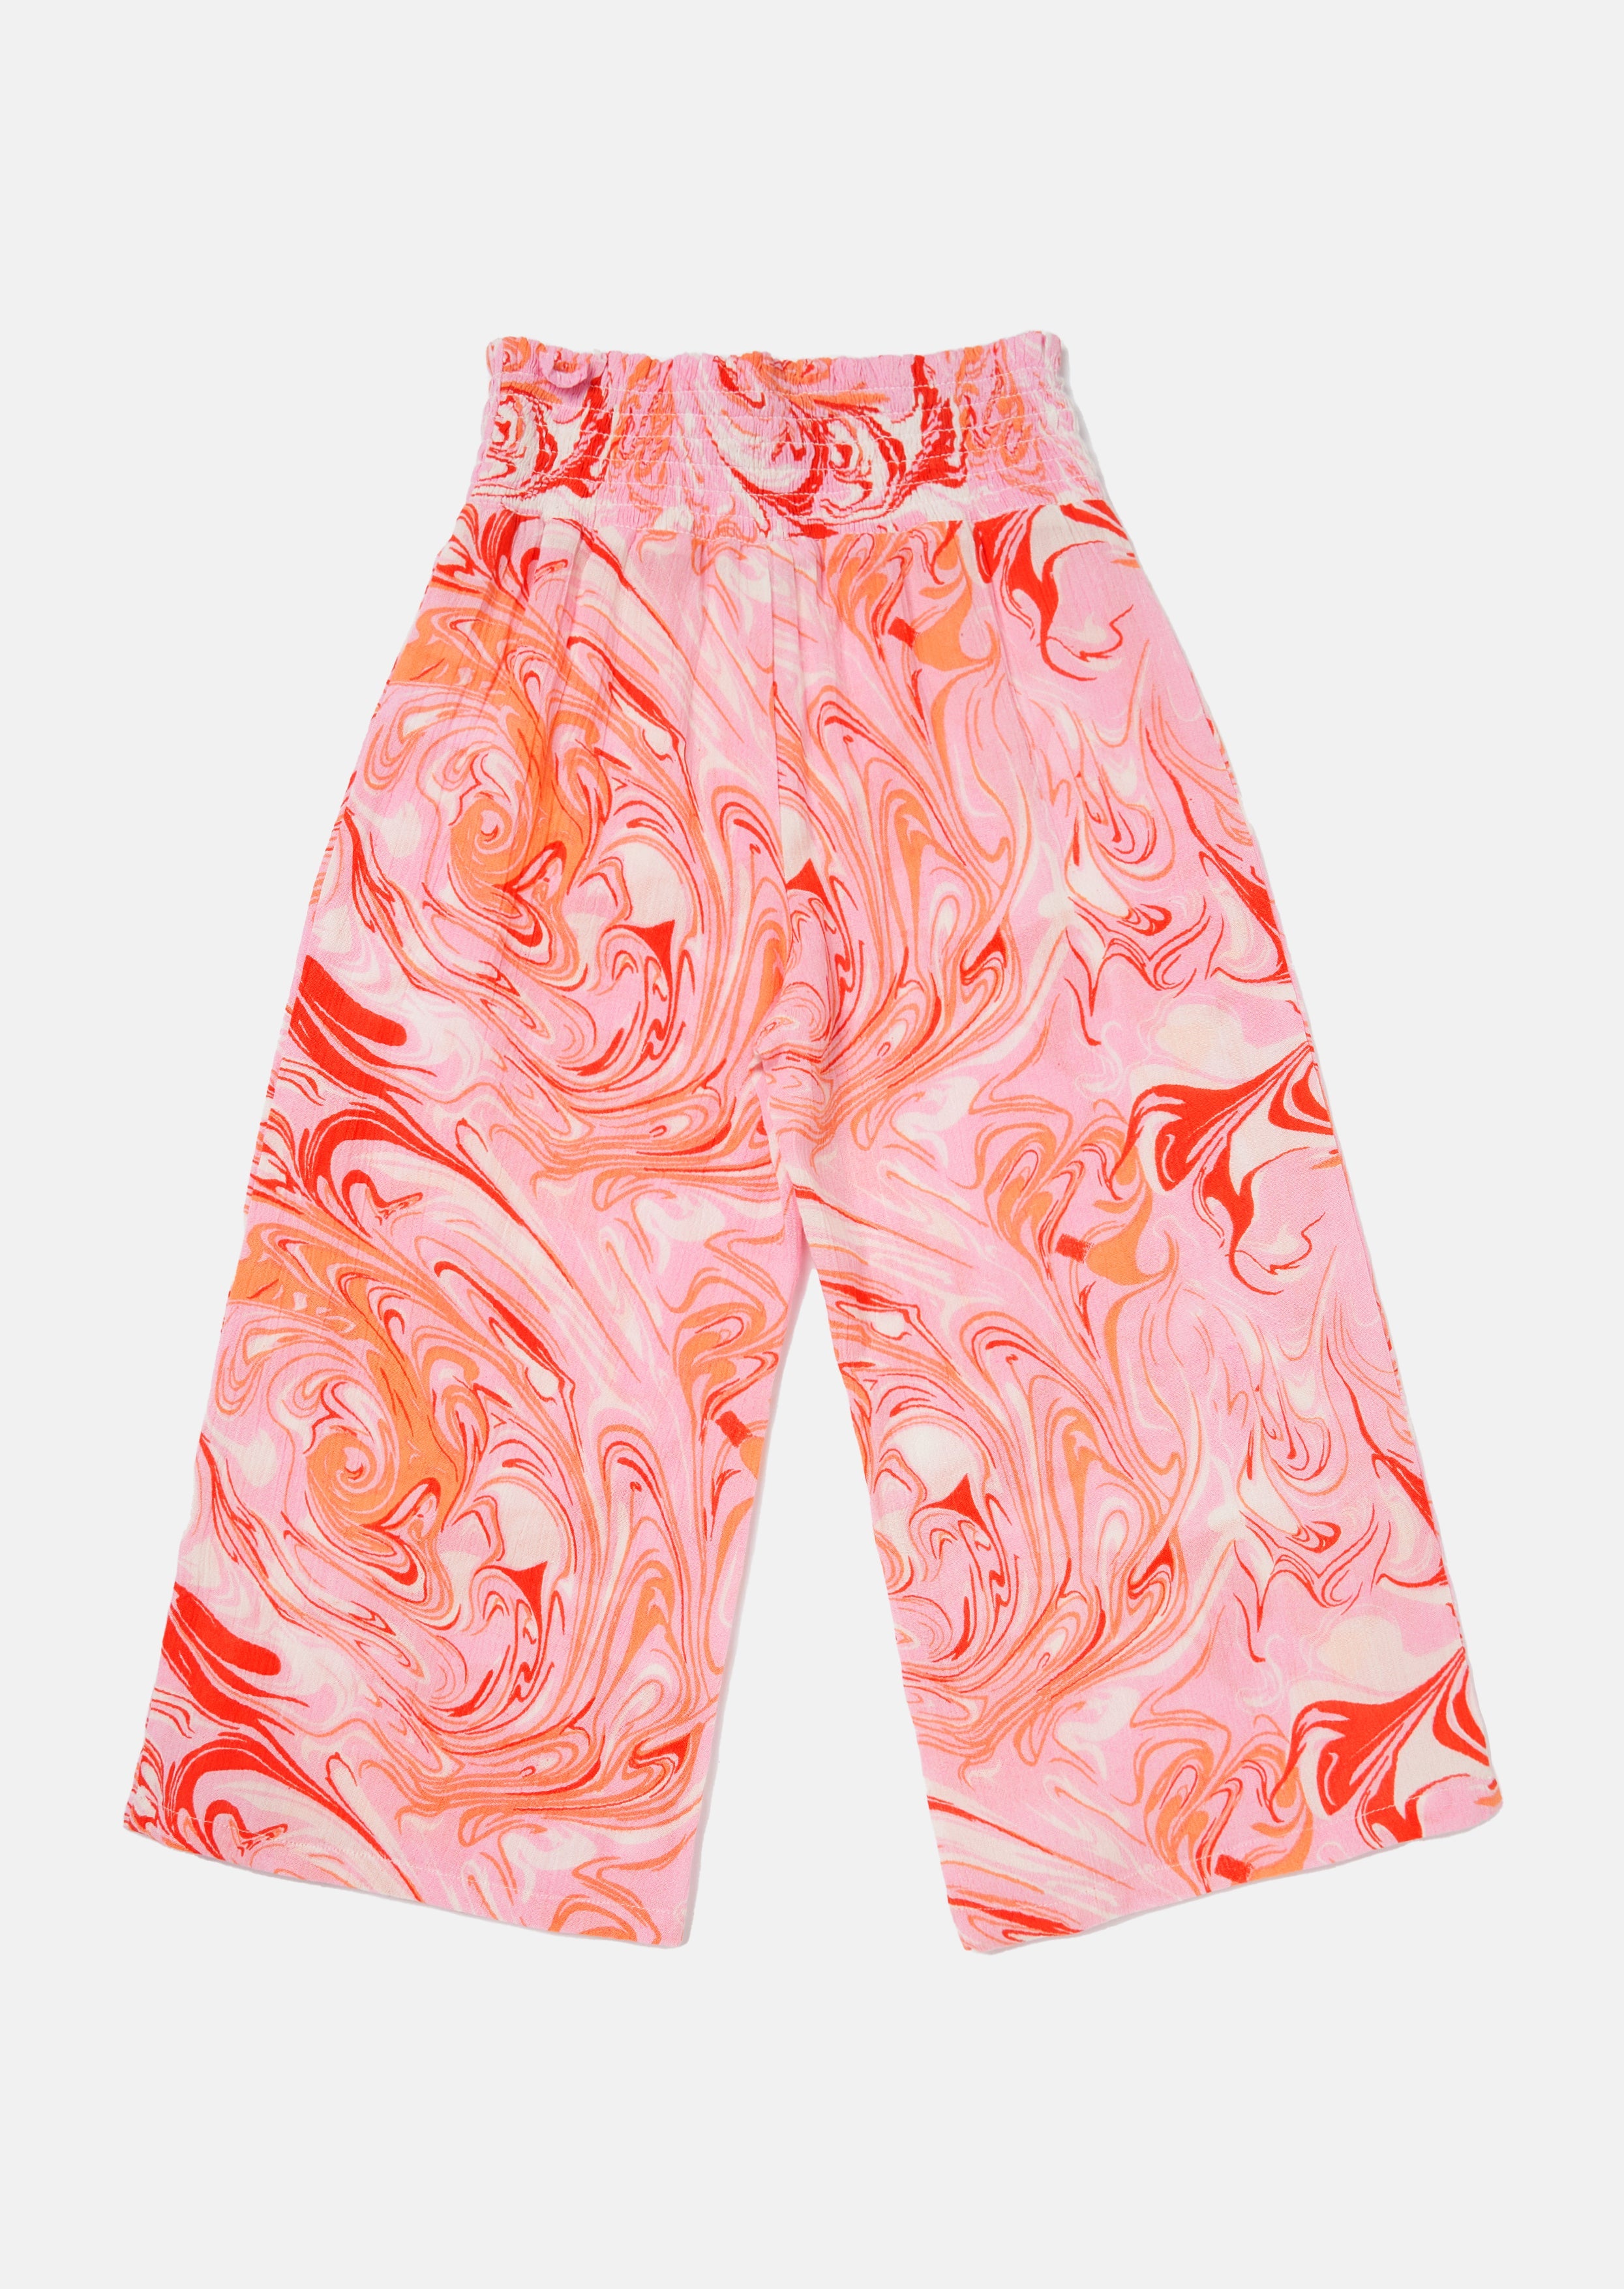 Girls Marble Printed Pink Culottes